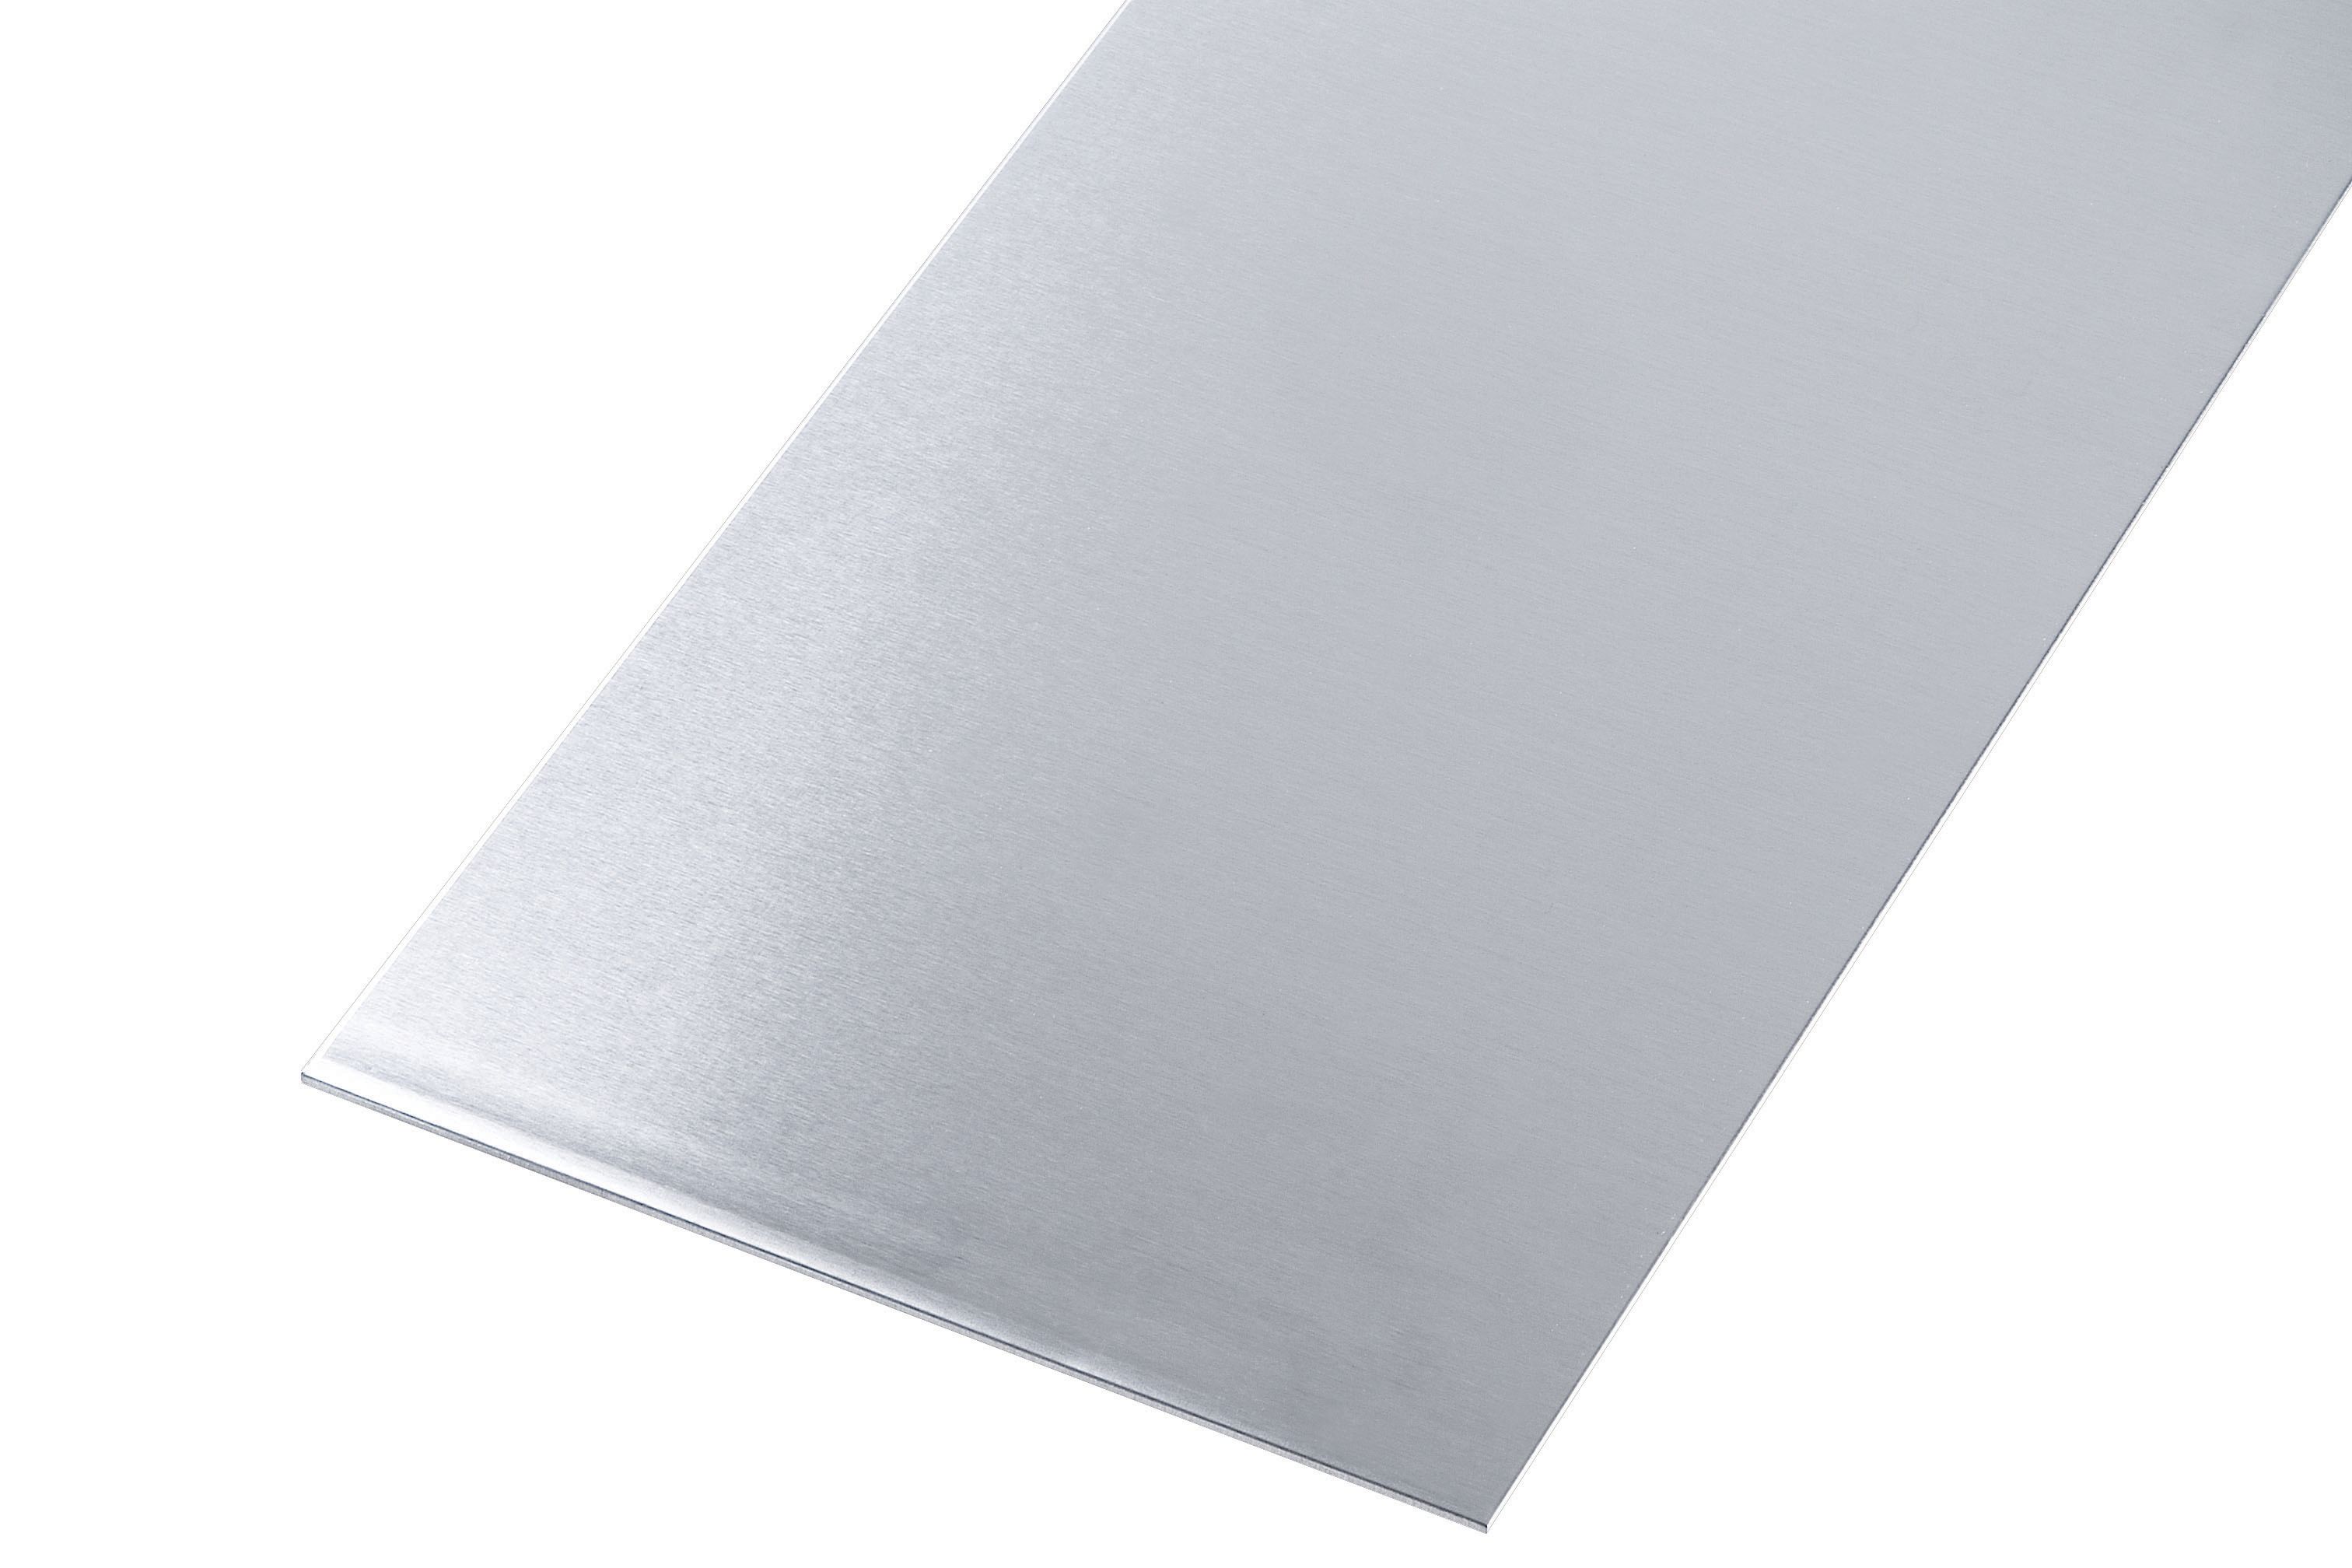 Rothley Aluminium with Stainless Steel Effect Finish Metal Sheet - 300 x 1000mm